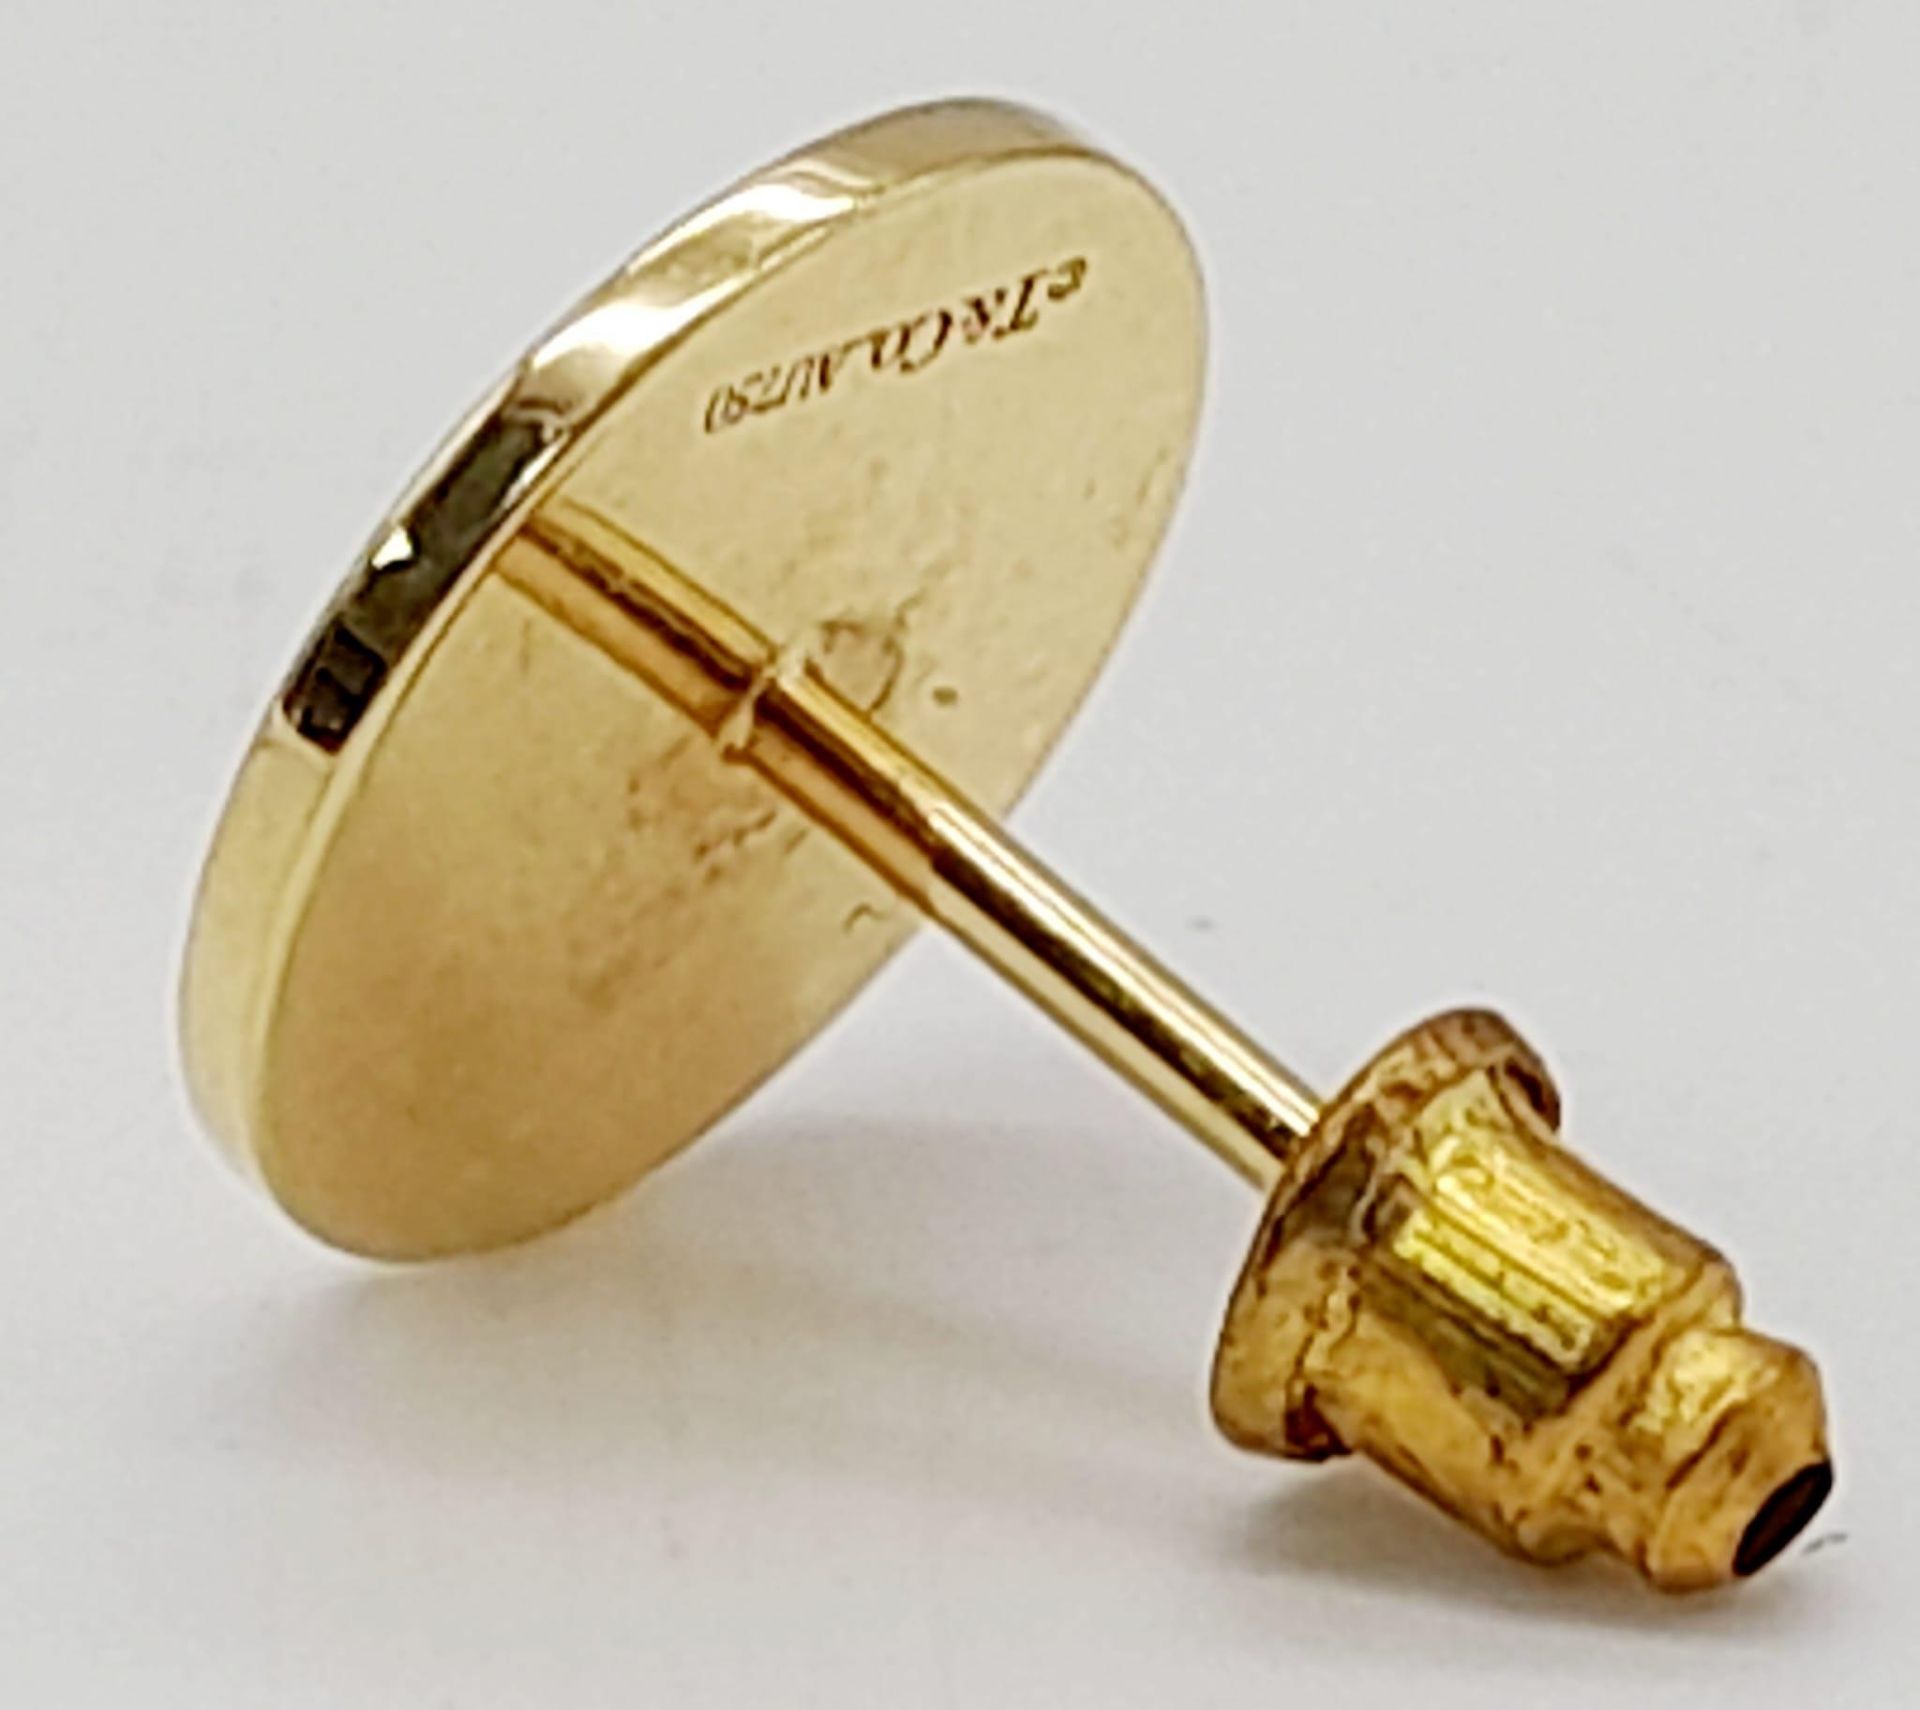 An 18K Yellow Gold Tiffany and Co. Tie Pin. 2.55g - Image 3 of 6